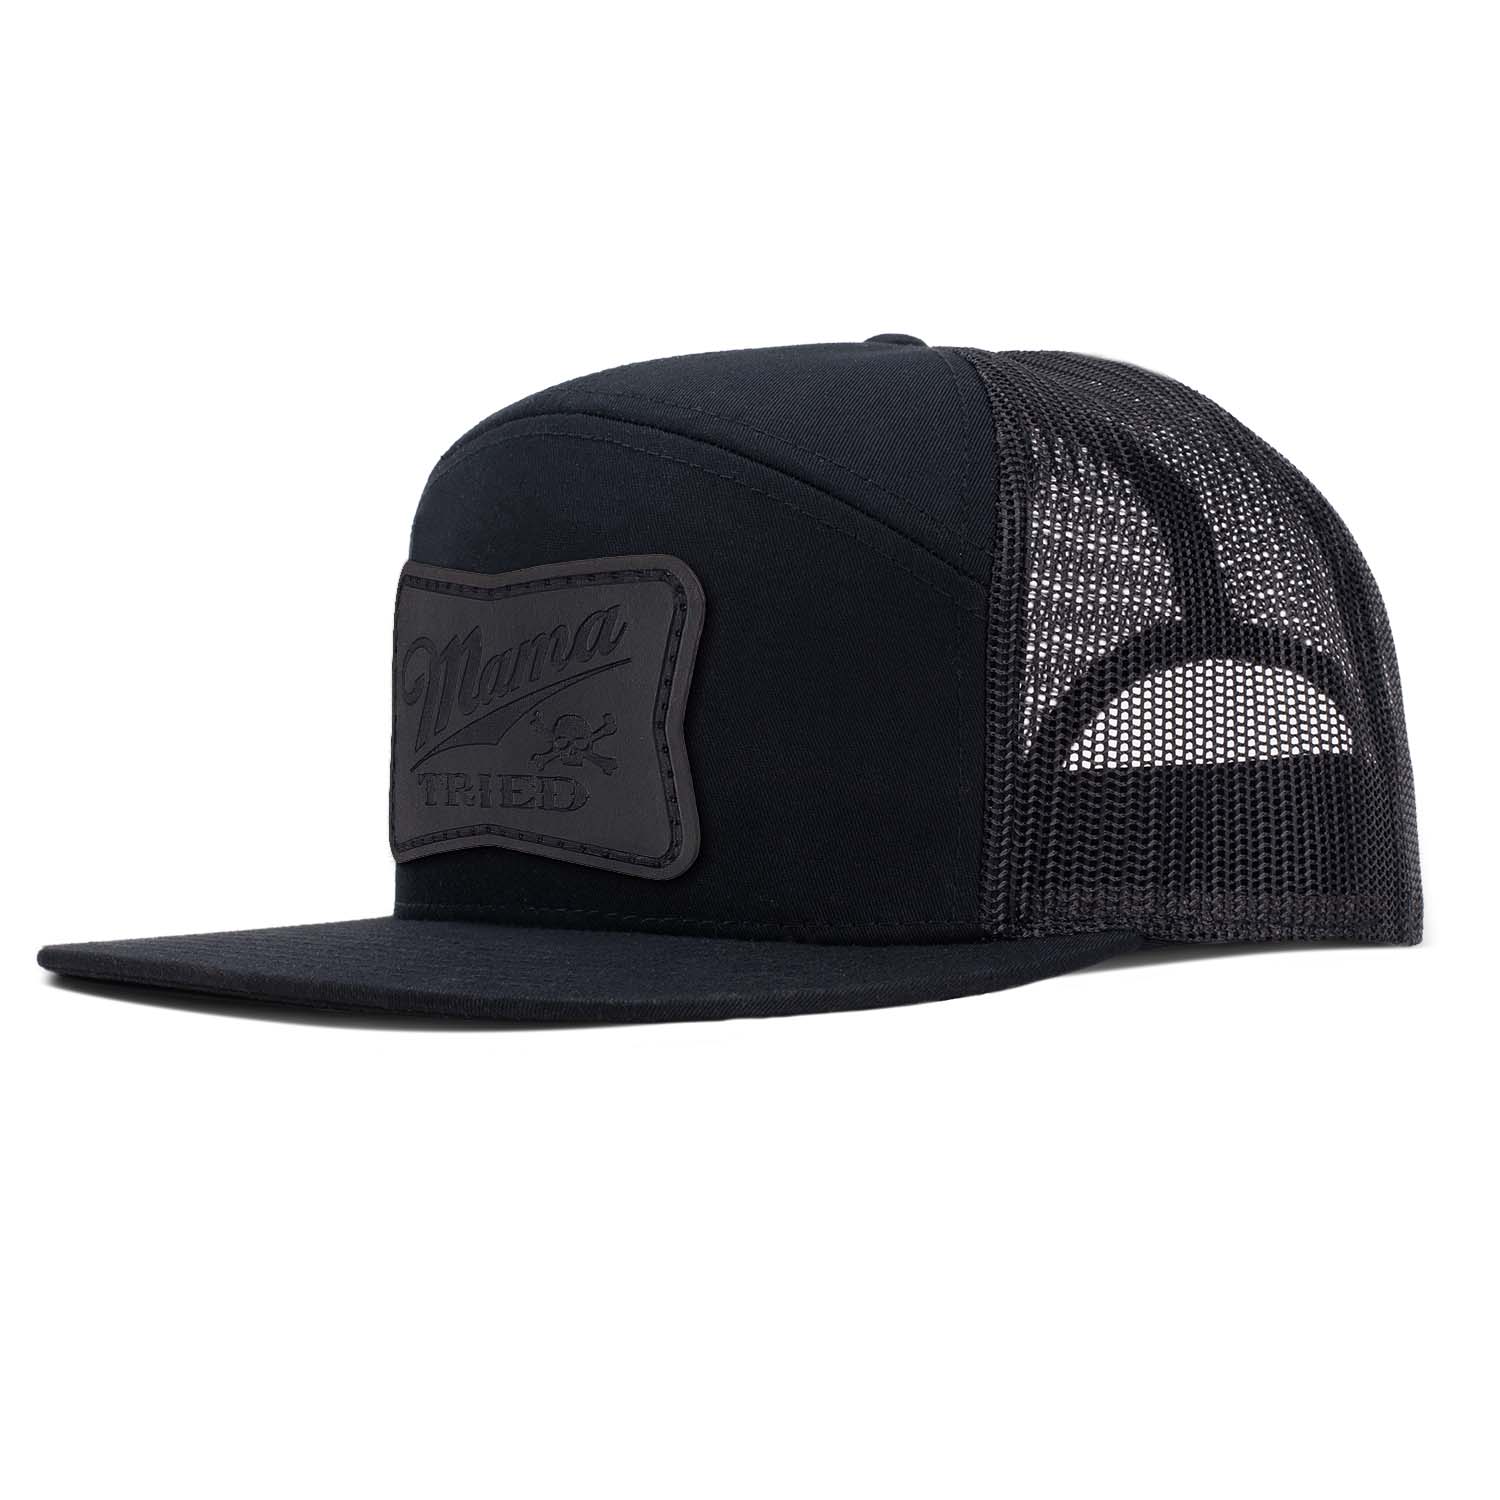 An all black 7 panel trucker with black mesh featuring our full grain leather Mama Tried patch in all black on the seamless front panel